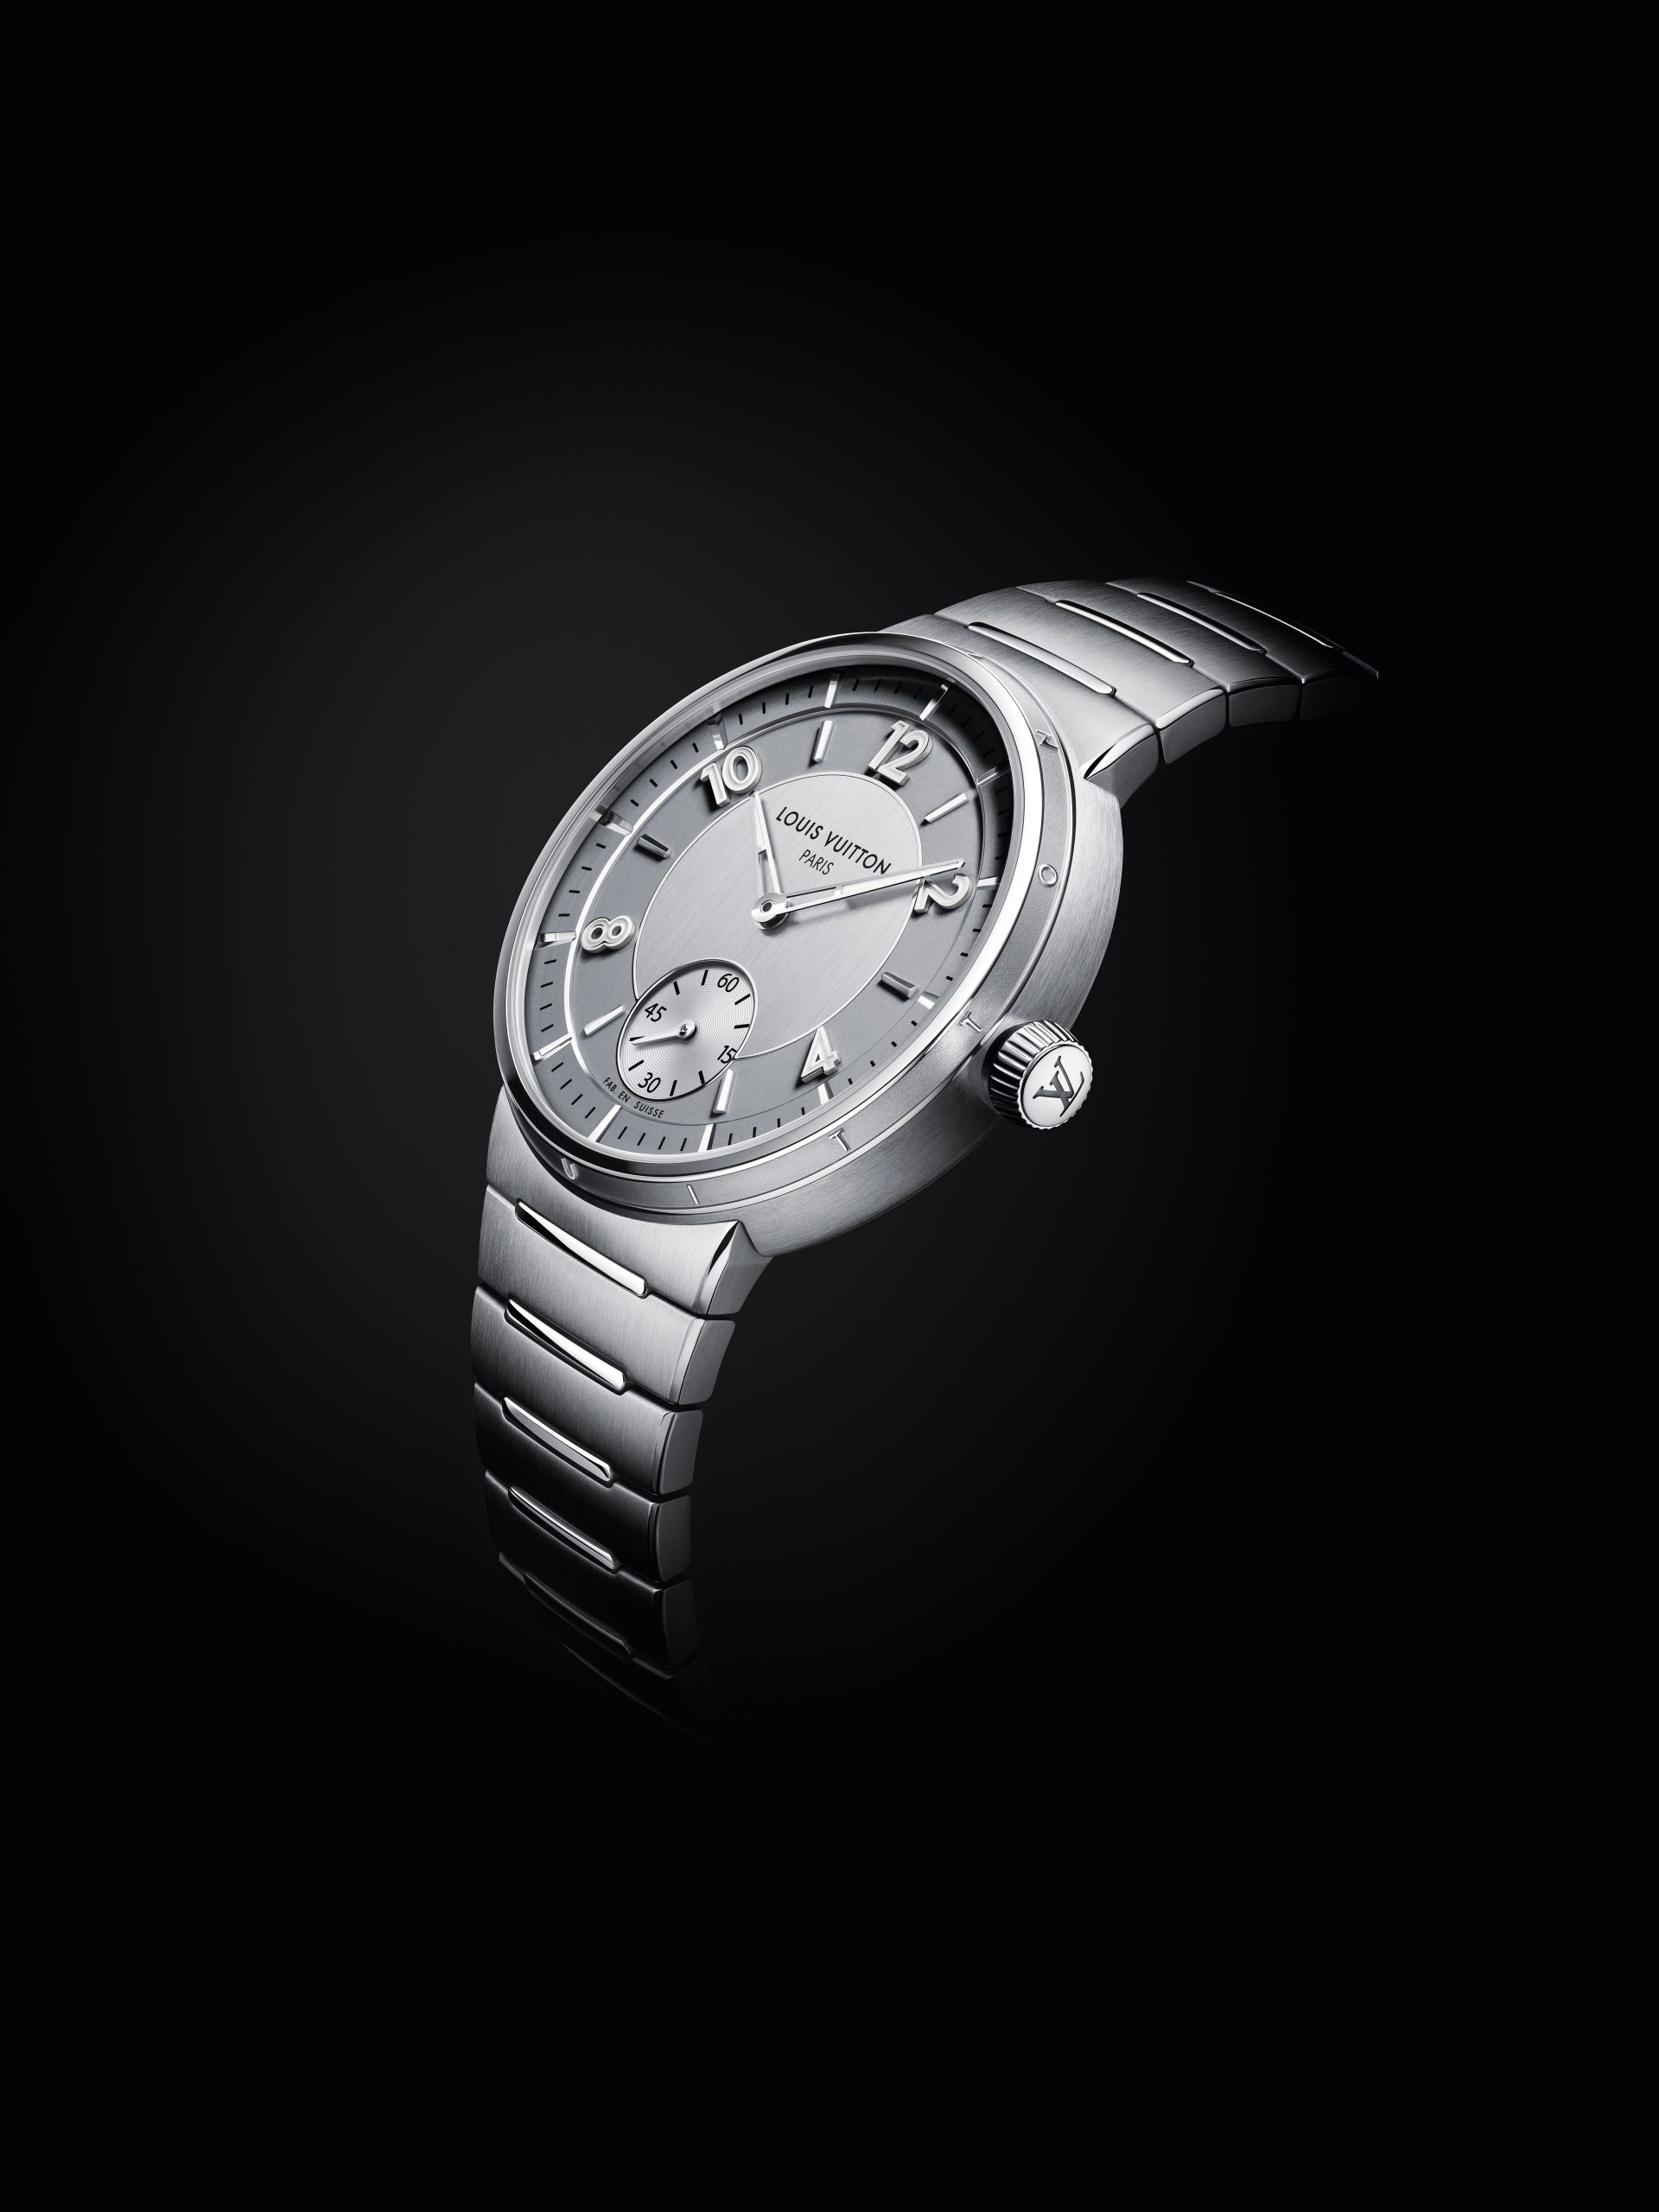 Louis Vuitton - Tambour Carpe Diem, Louis Vuitton, participating brand to  Watches and Wonders, will unveil the Tambour Carpe Diem, combining  exclusive high watchmaking caliber with an, By WatchesandWonders